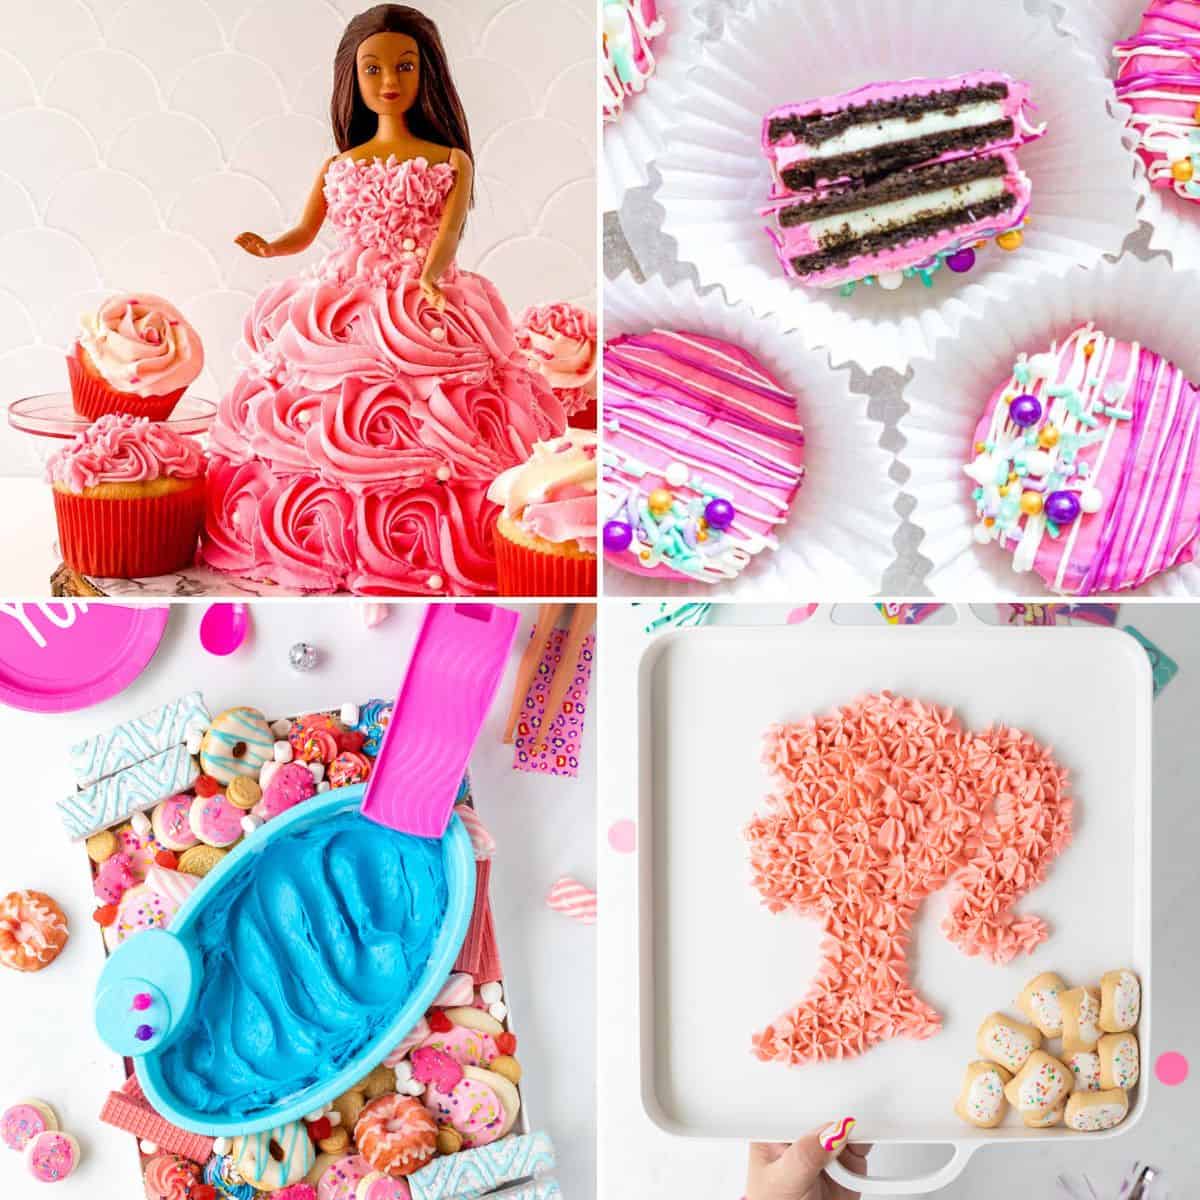 new barbie movie party decoration kit with balloons included decoration  party theme , plates , cups and banner doll decor happy birthday/  sleepover/ movie night 